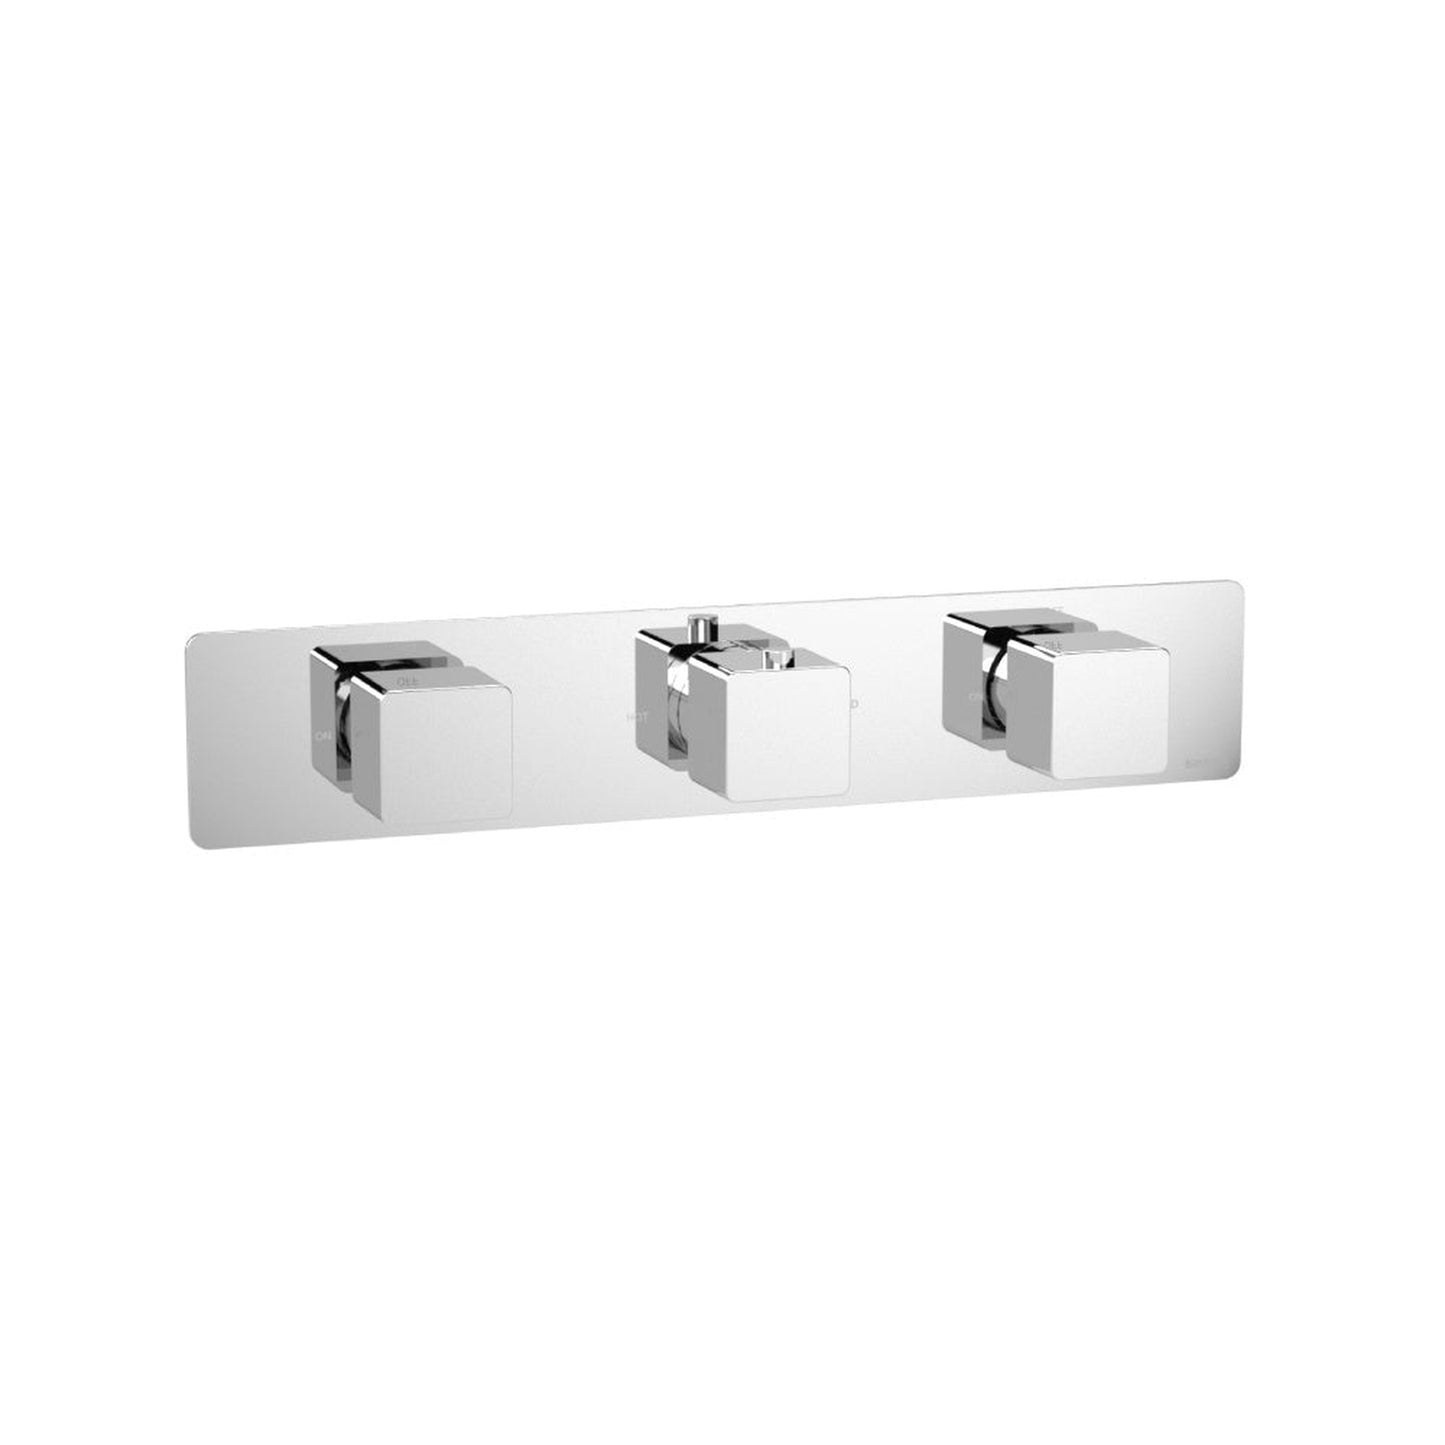 Isenberg Serie 196 Two Output Trim for Horizontal Thermostatic Valve With 2 Volume Control in Chrome